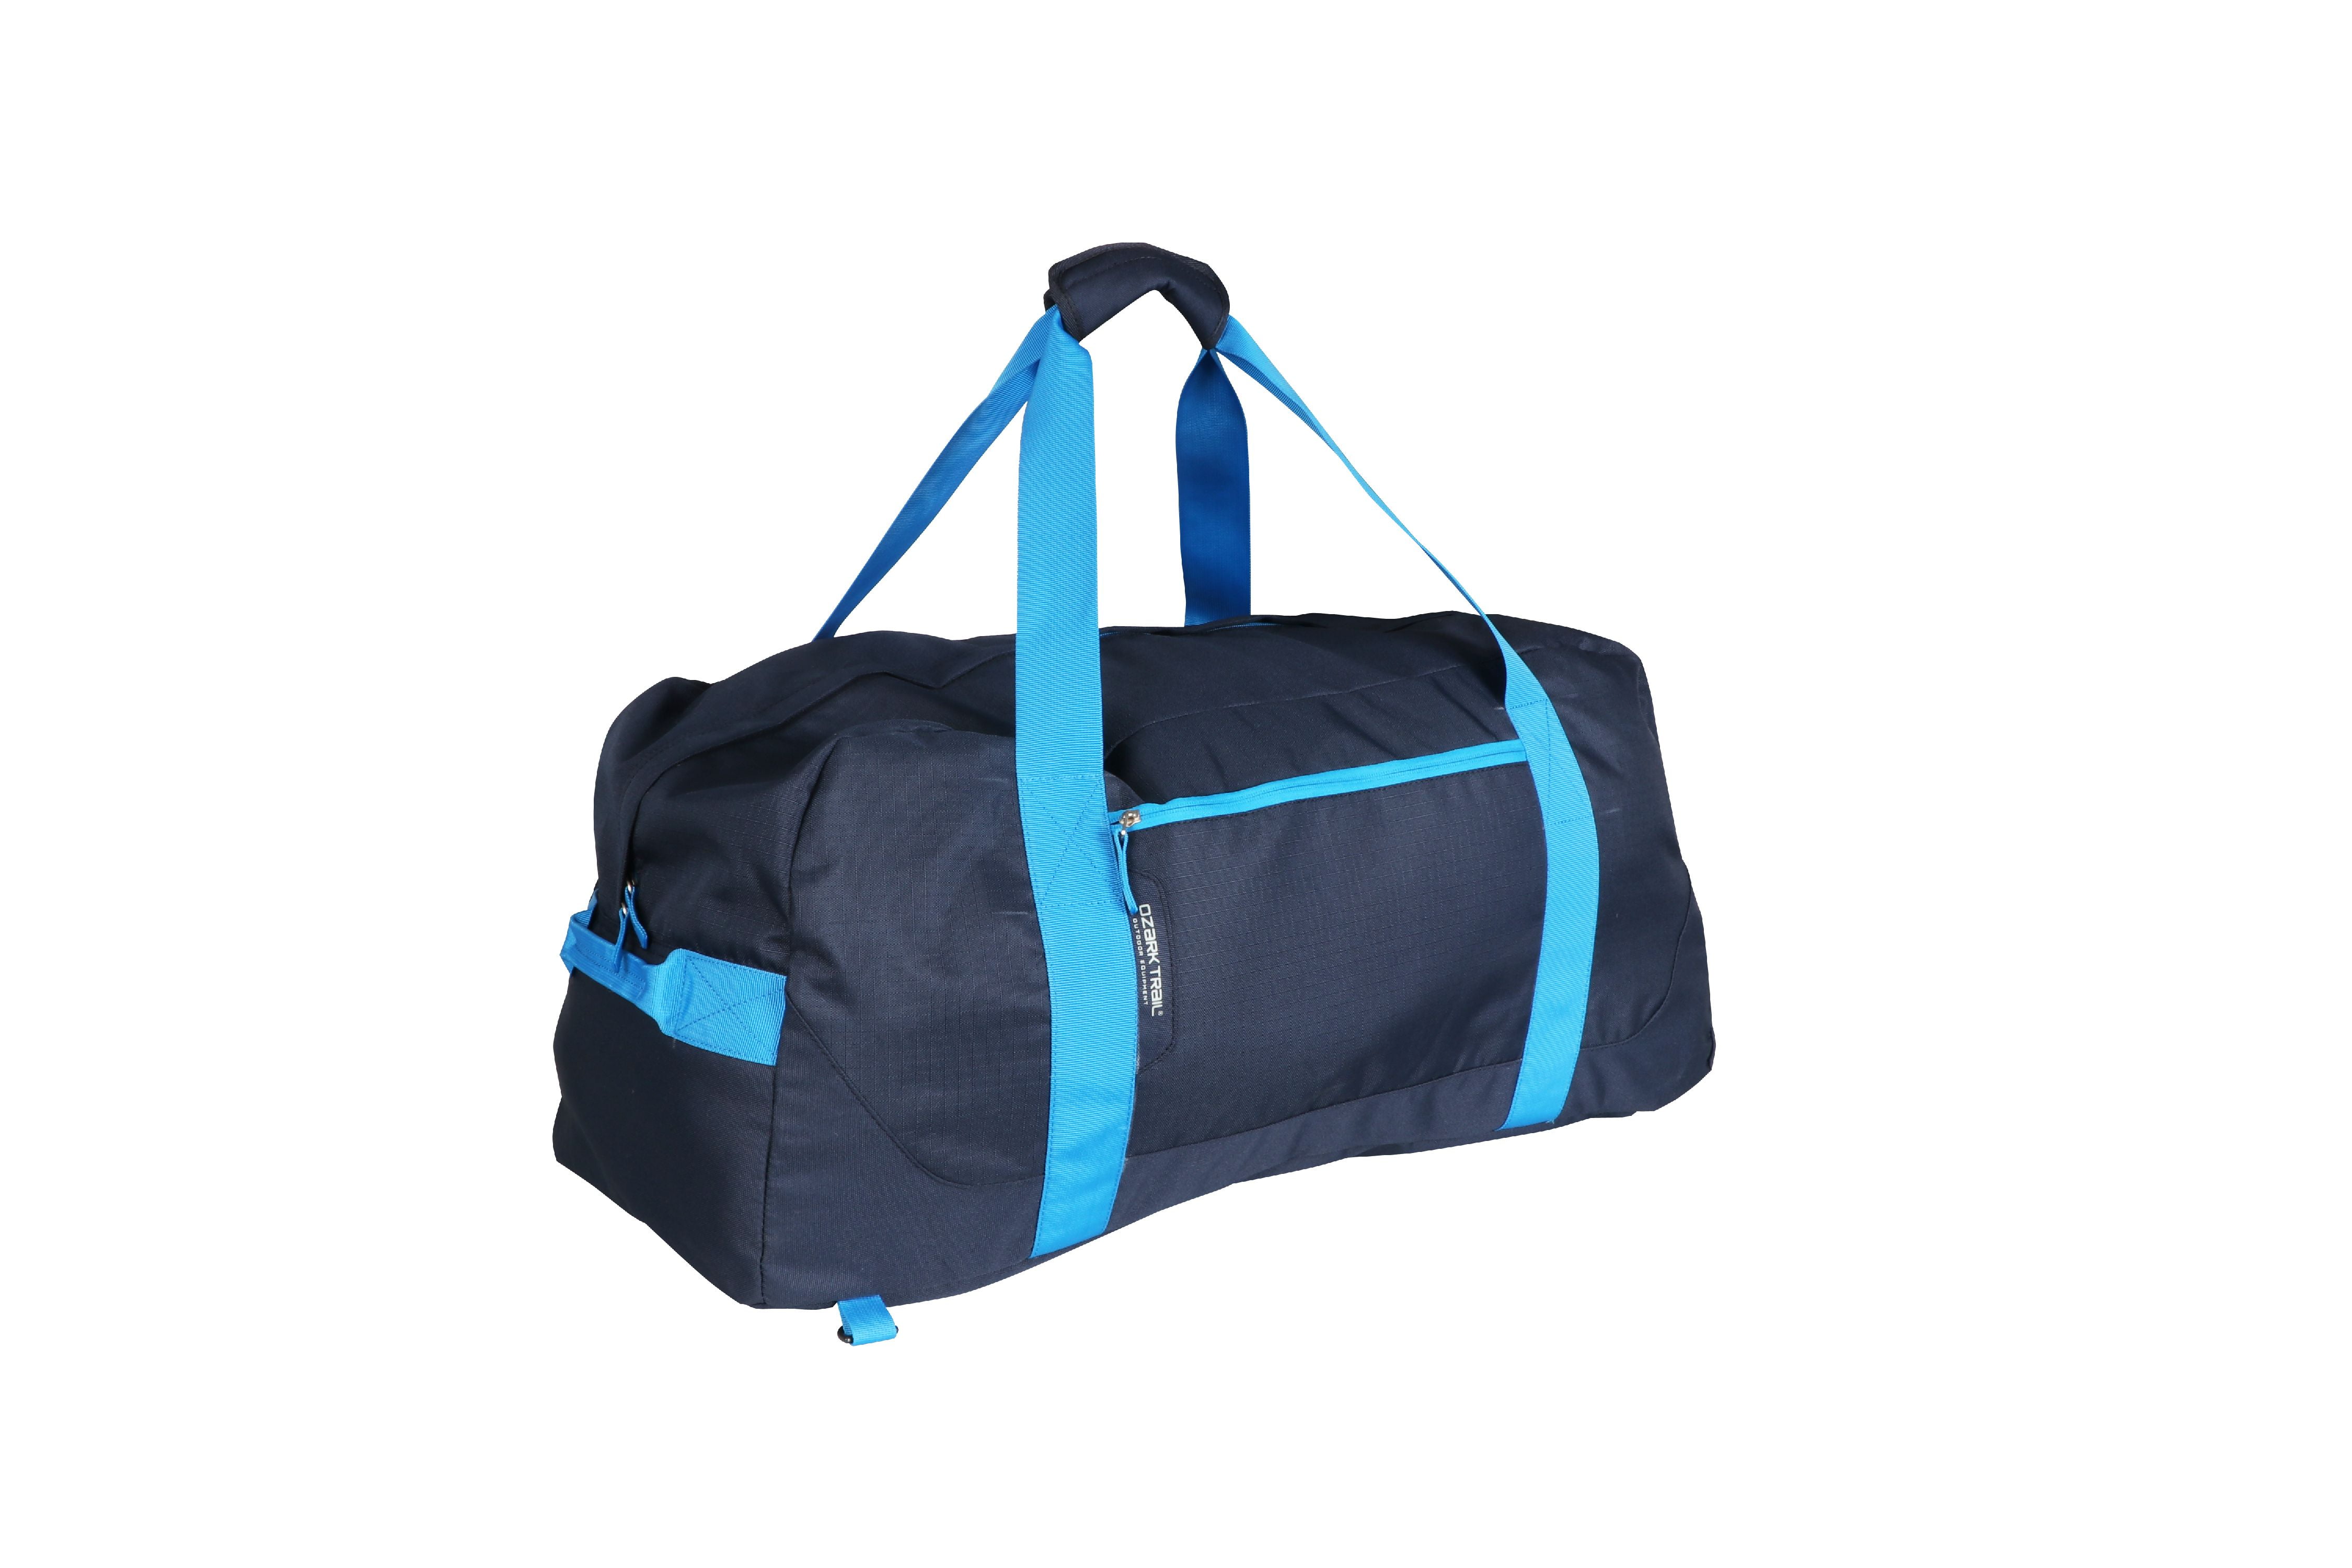 Ozark Trail 90L Blue Camp Carry All Duffel Bag with Straps